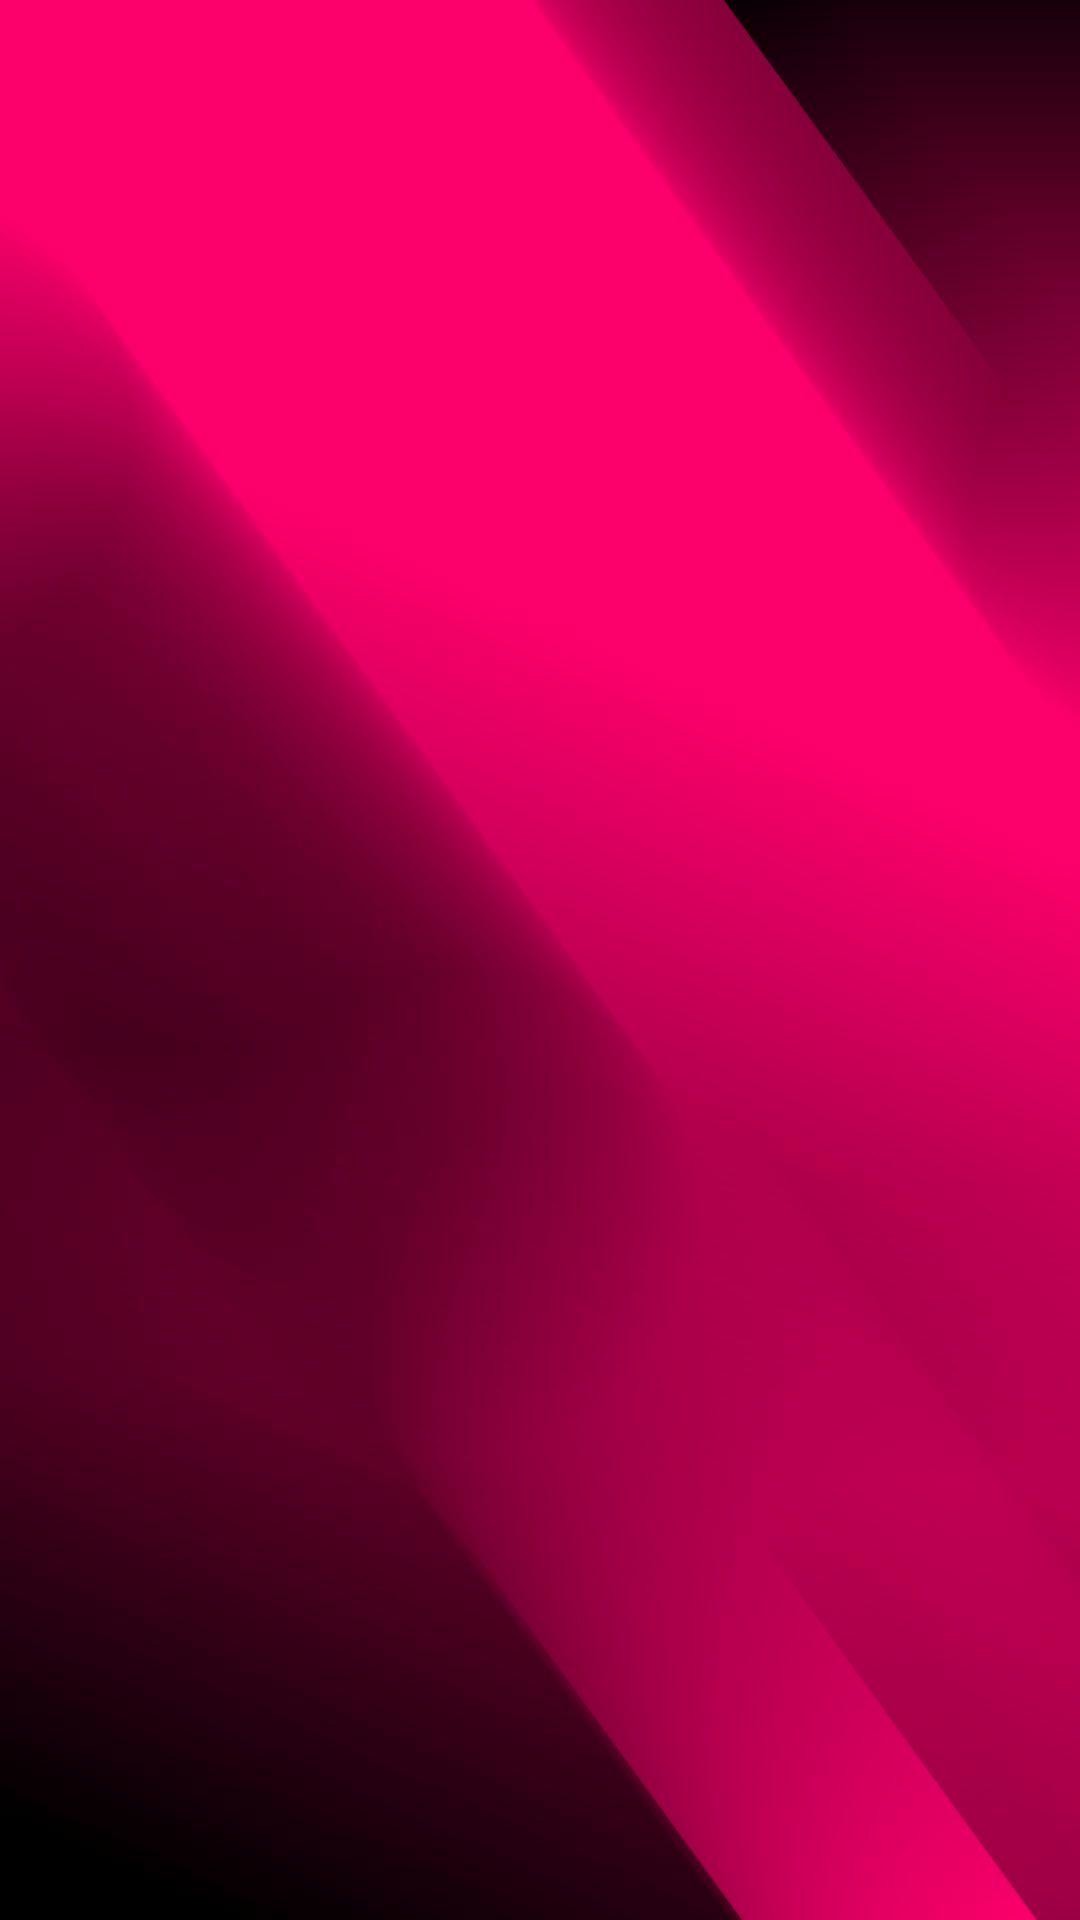 1080x1920 wallpaper.wiki-Cool-Pink-Iphone-Background-HD-PIC-